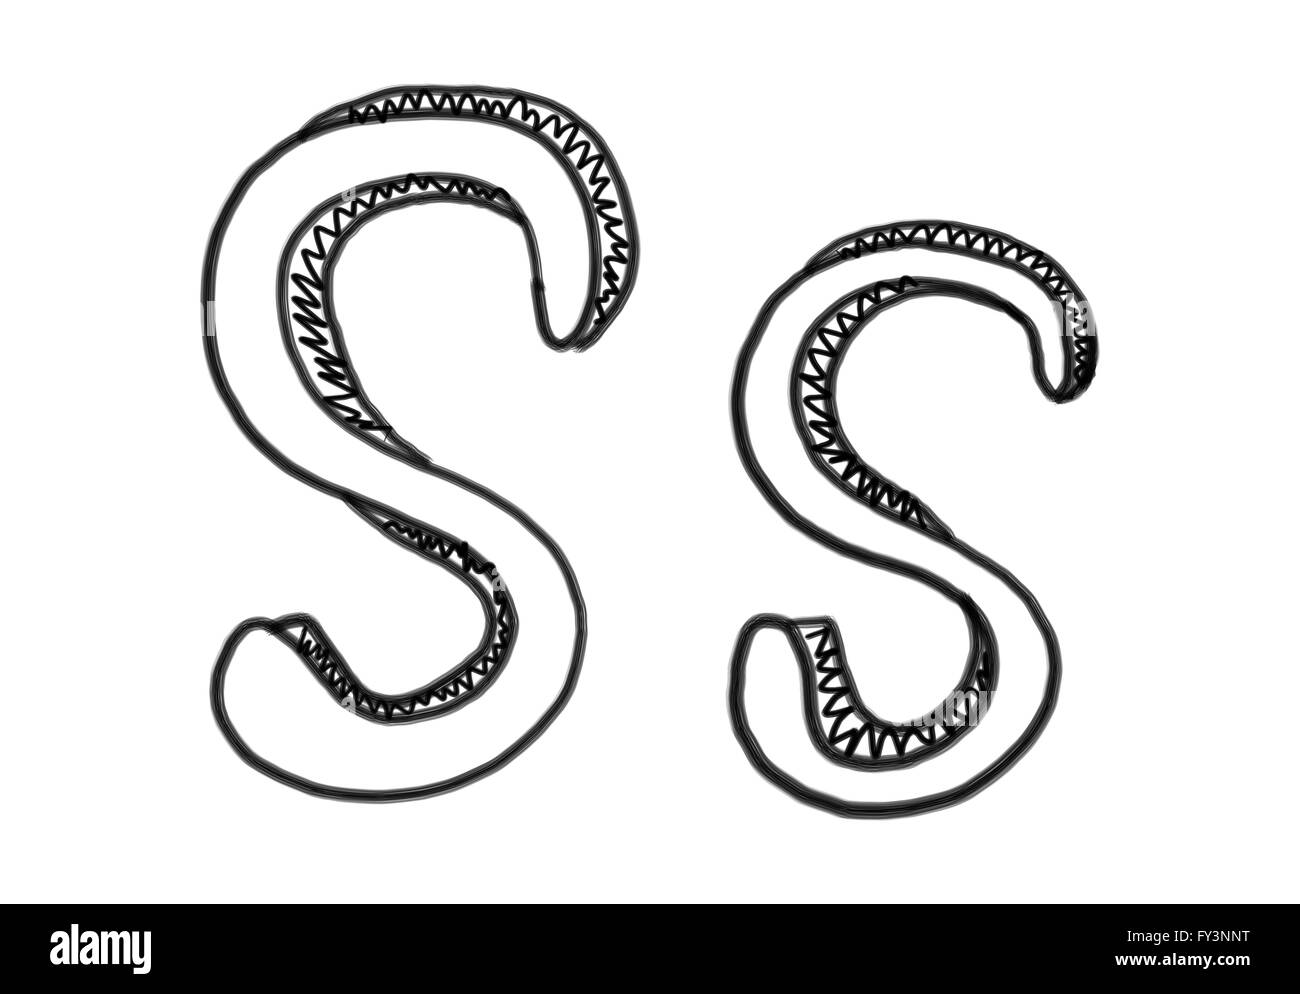 New drawing Character S of alphabet logo icon in design elements. Stock Photo